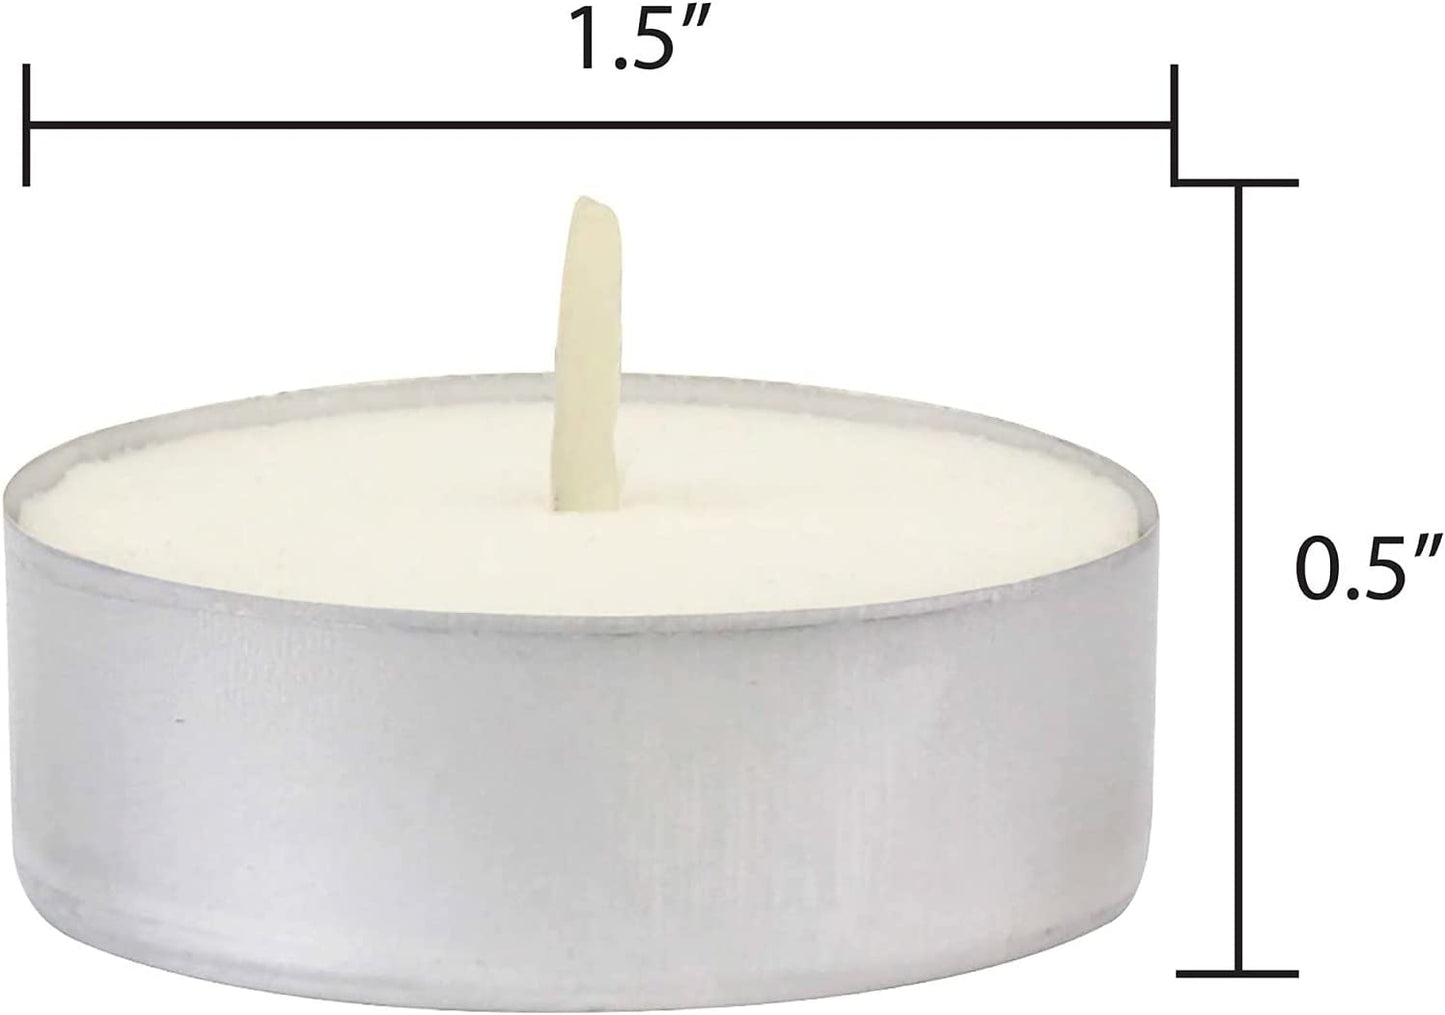 4 Hour Citronella Tea Light Candles, Tin Cup, 20 Count